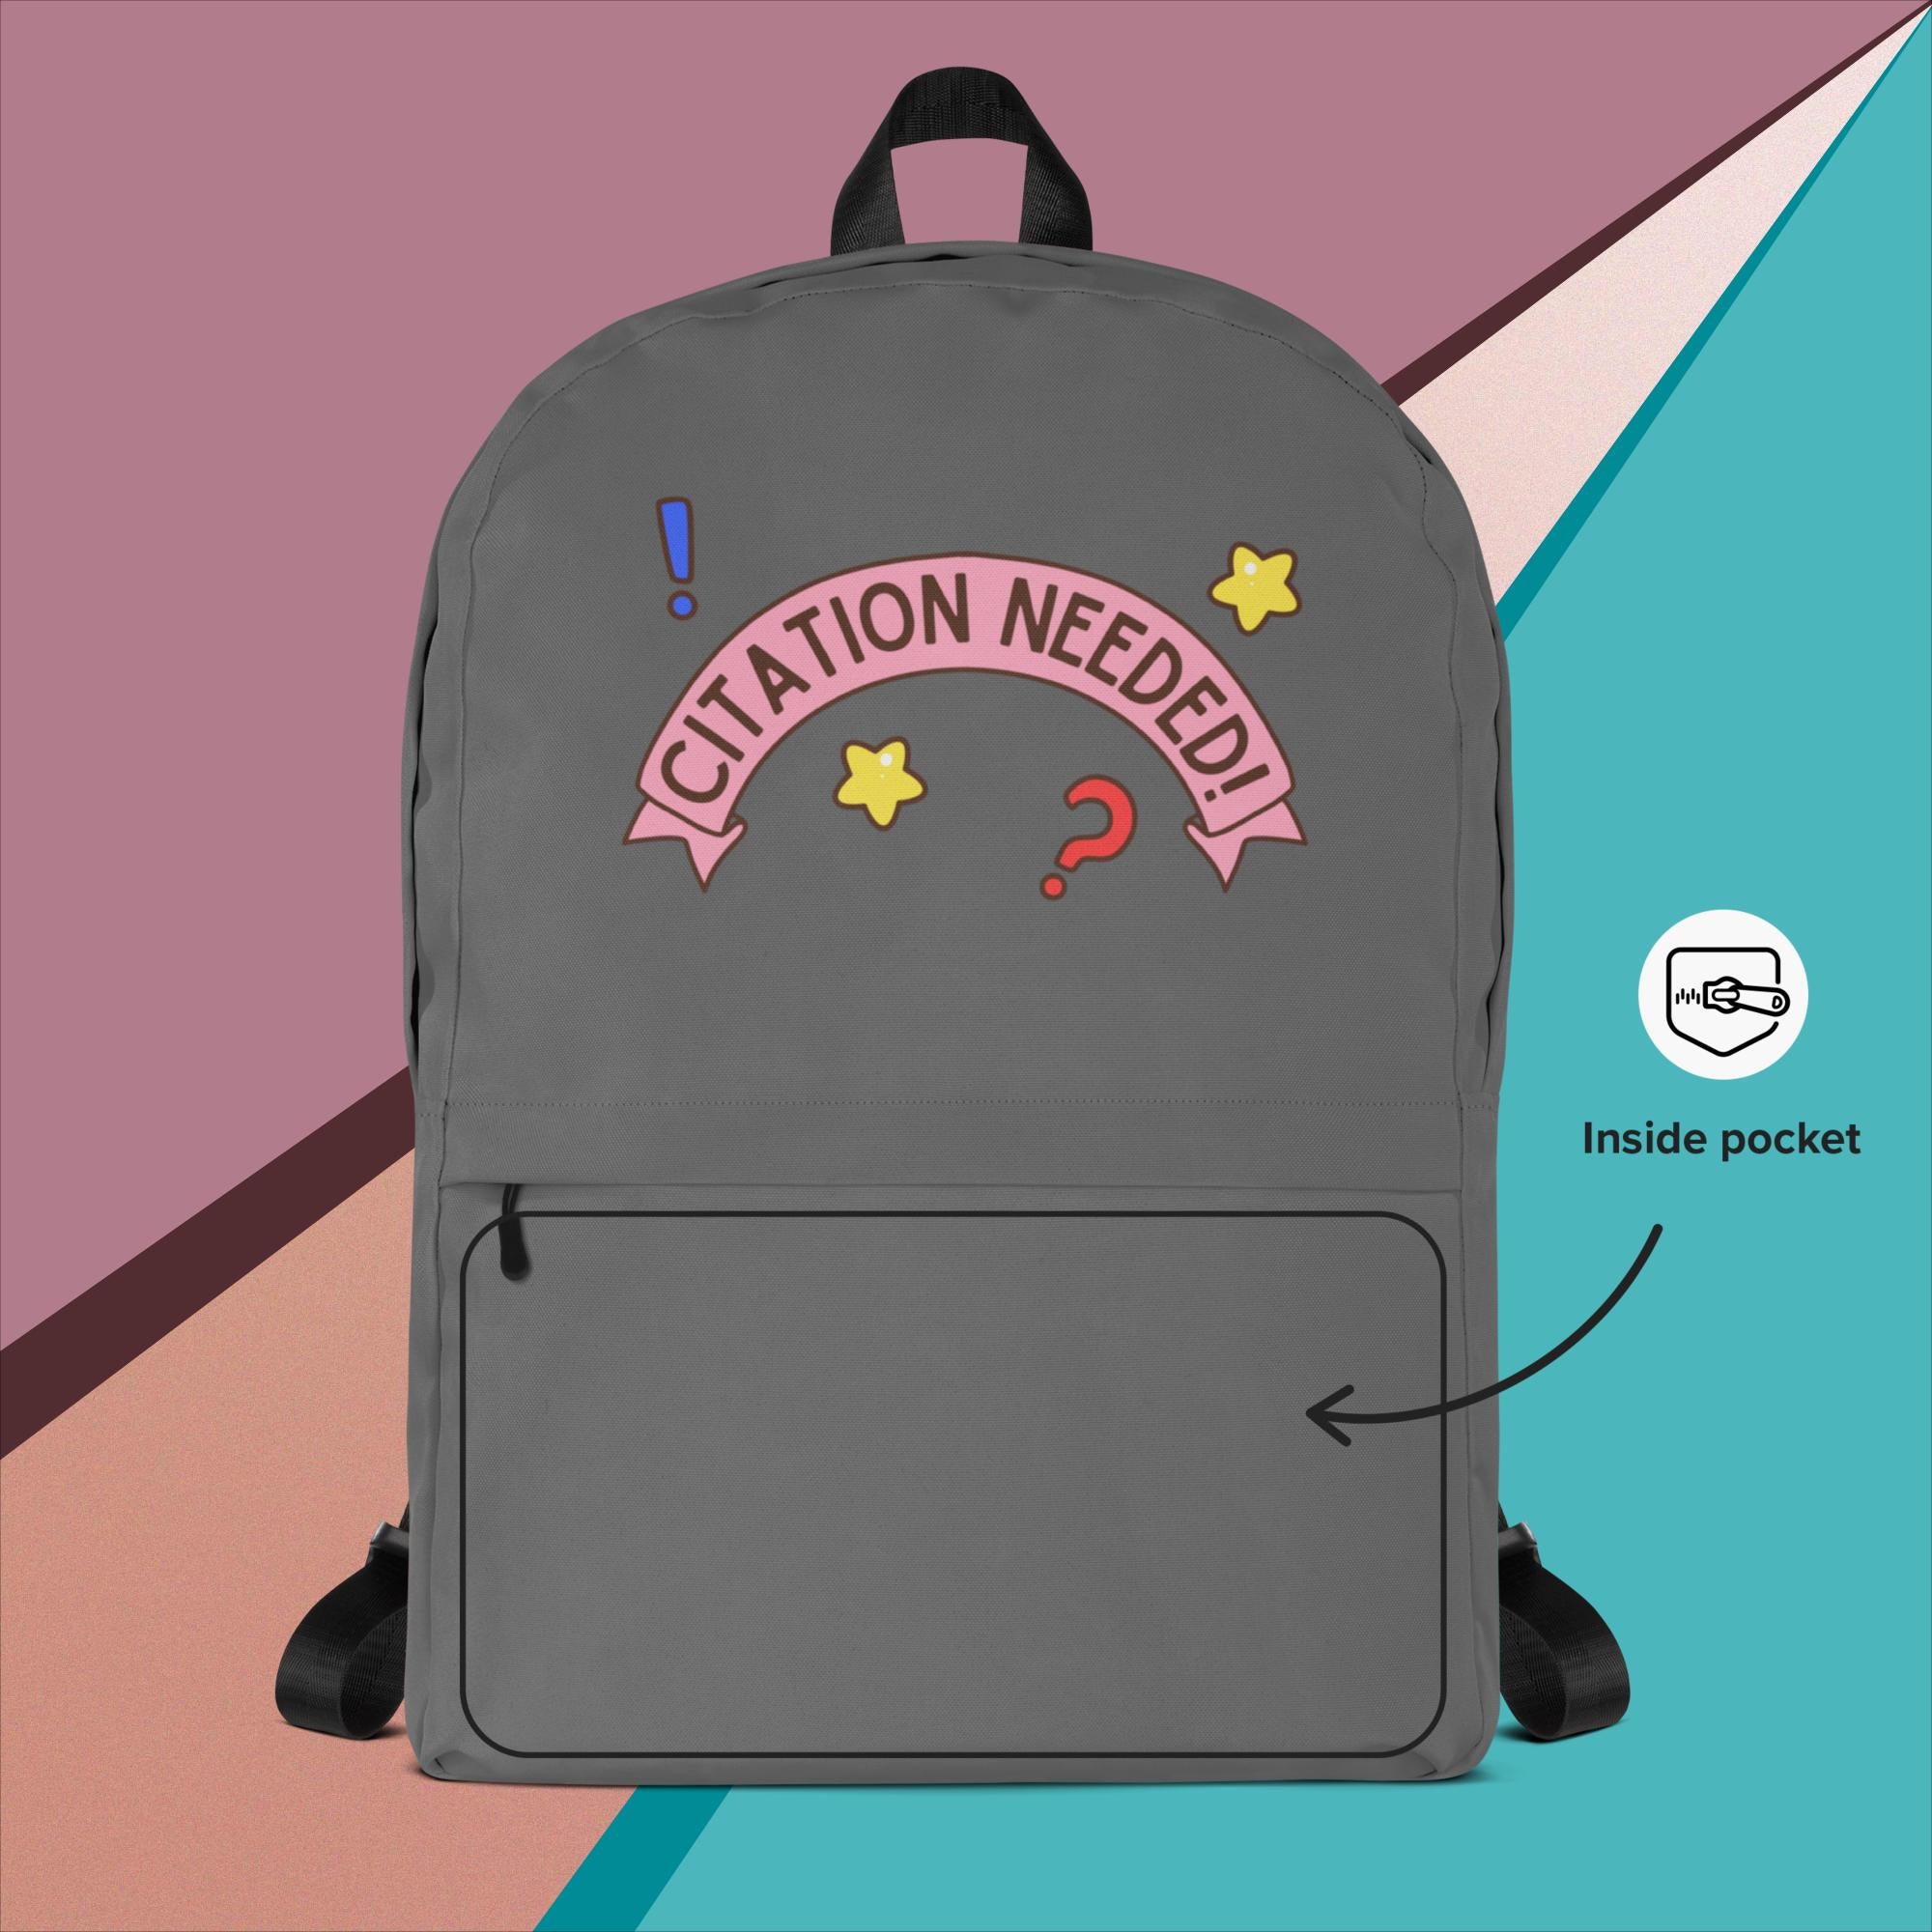 Citation Needed! Backpack